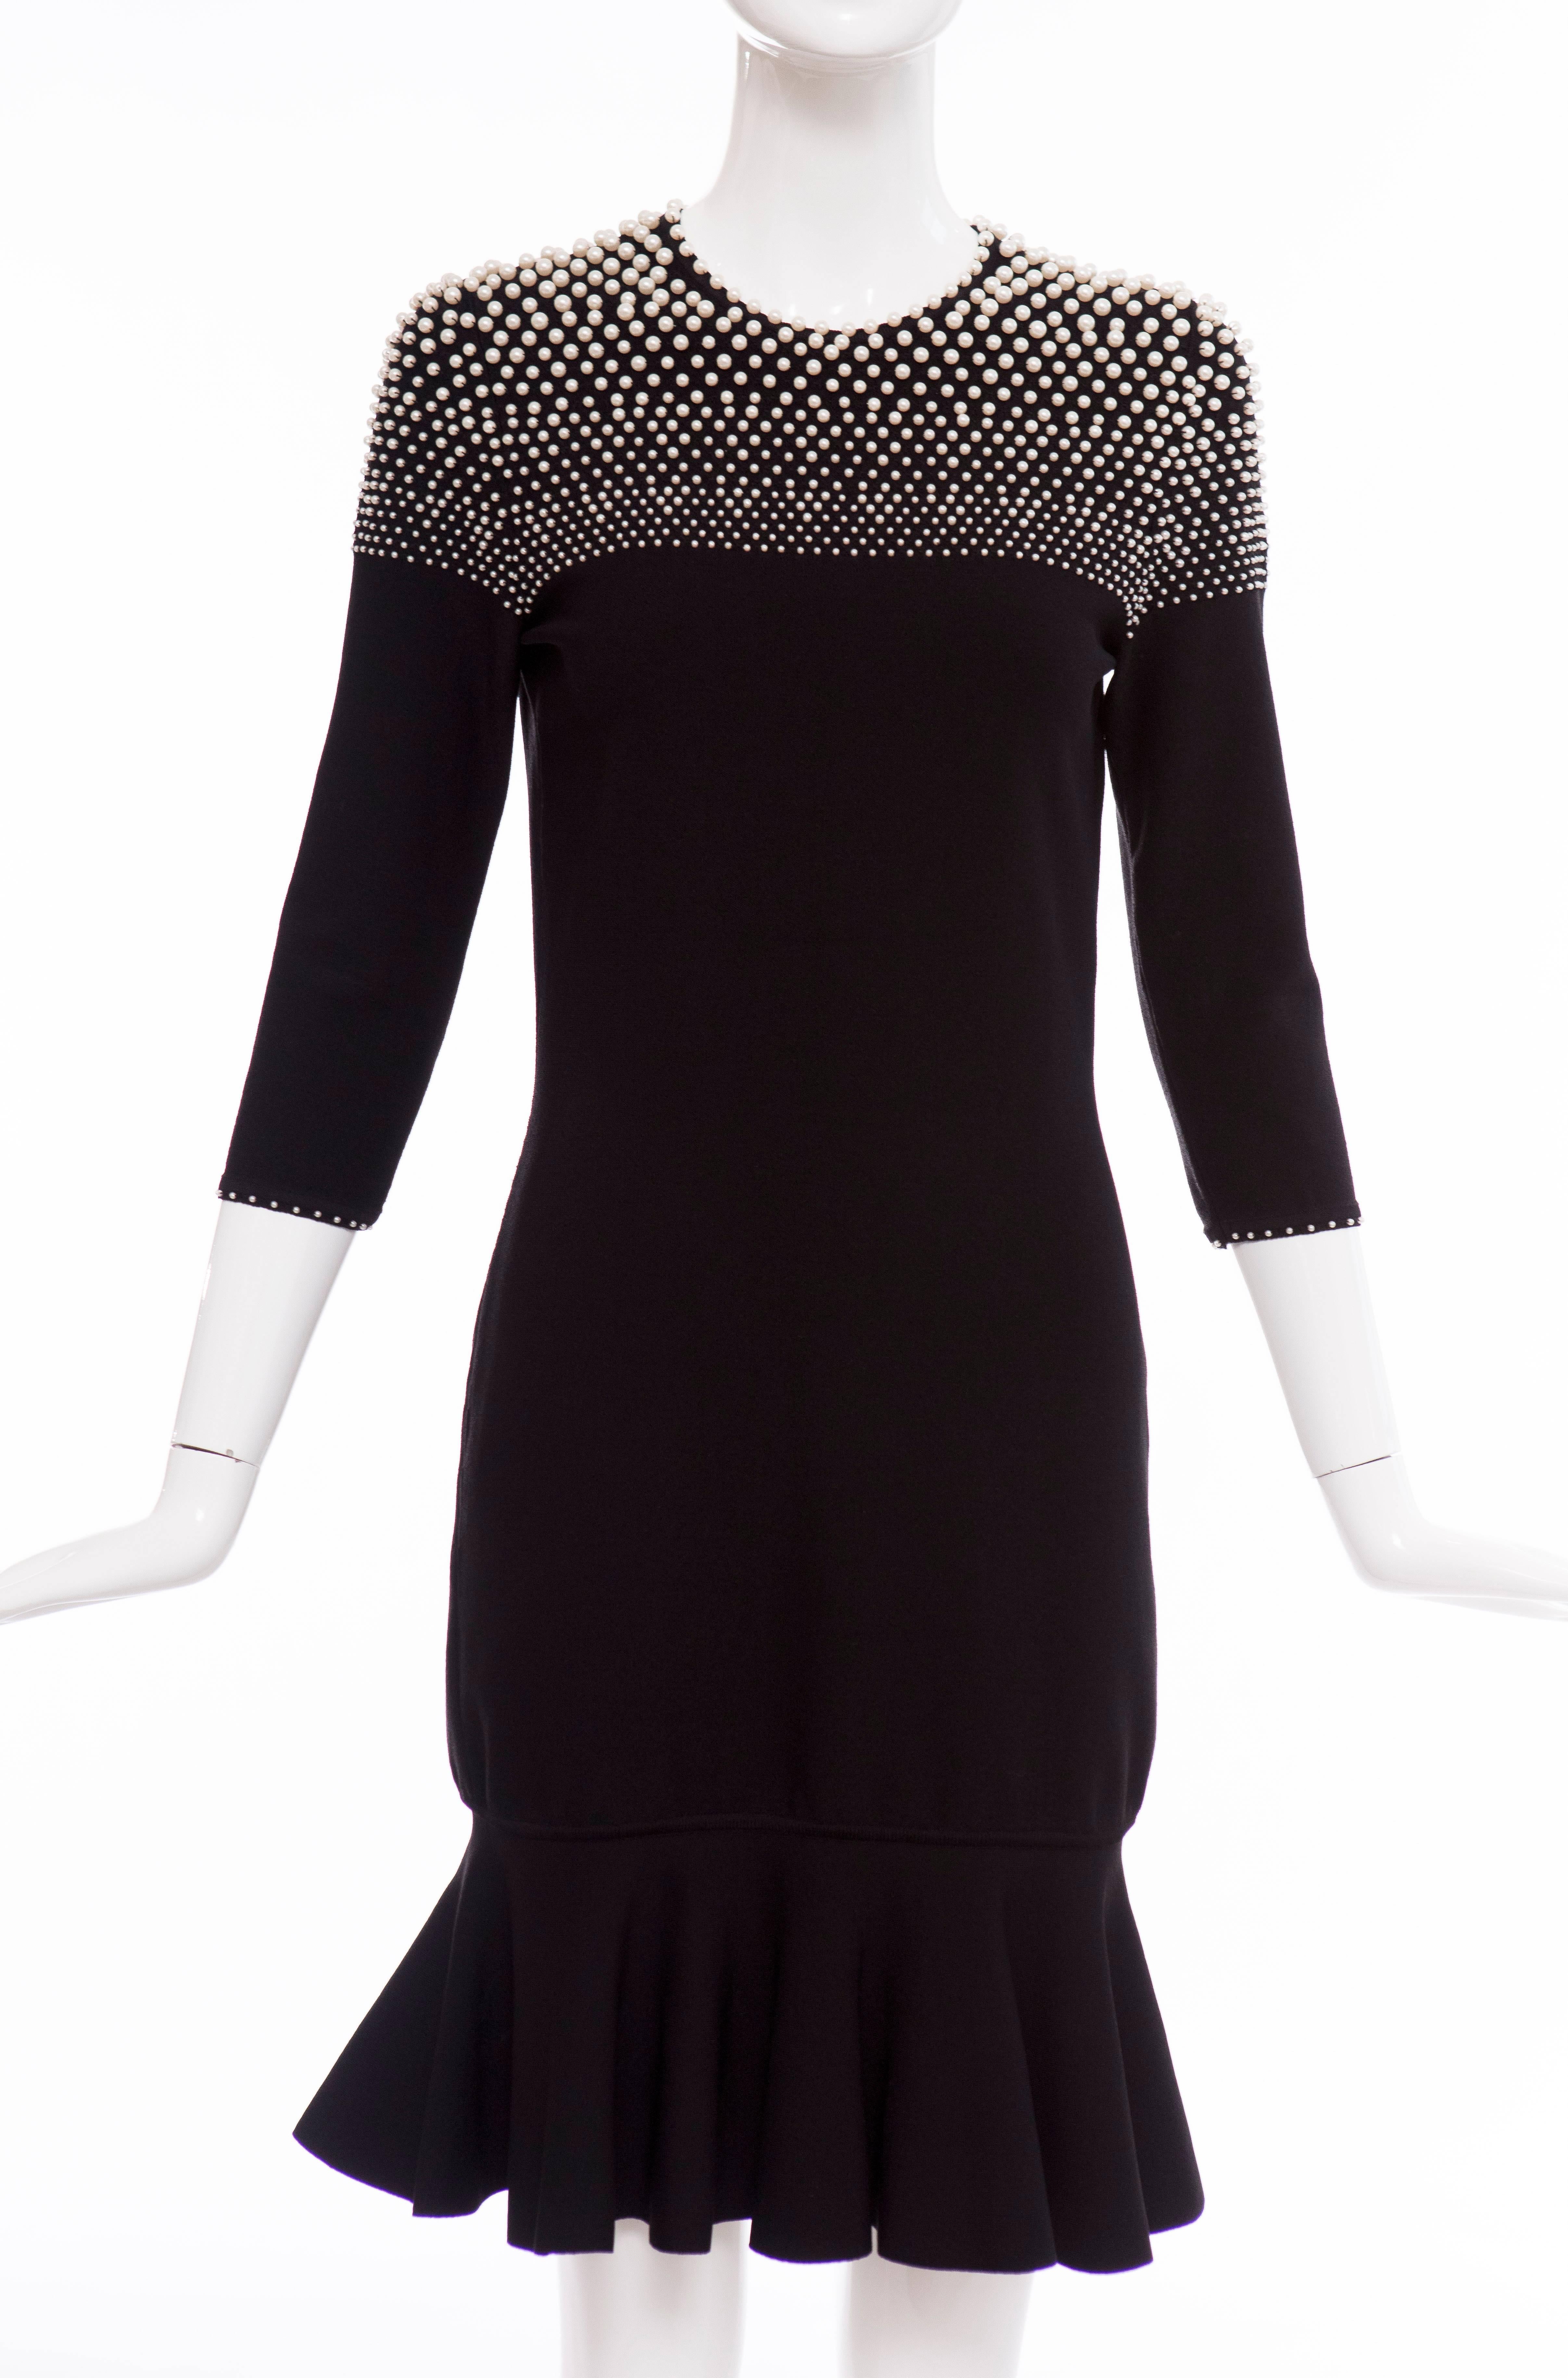 Alexander McQueen Autumn-Winter 2013, black long sleeve knit dress with round neckline, faux pearl embellishments at top throughout, embellished trim at sleeve opening, flared hem and keyhole at center back featuring button closure at nape.

Bust